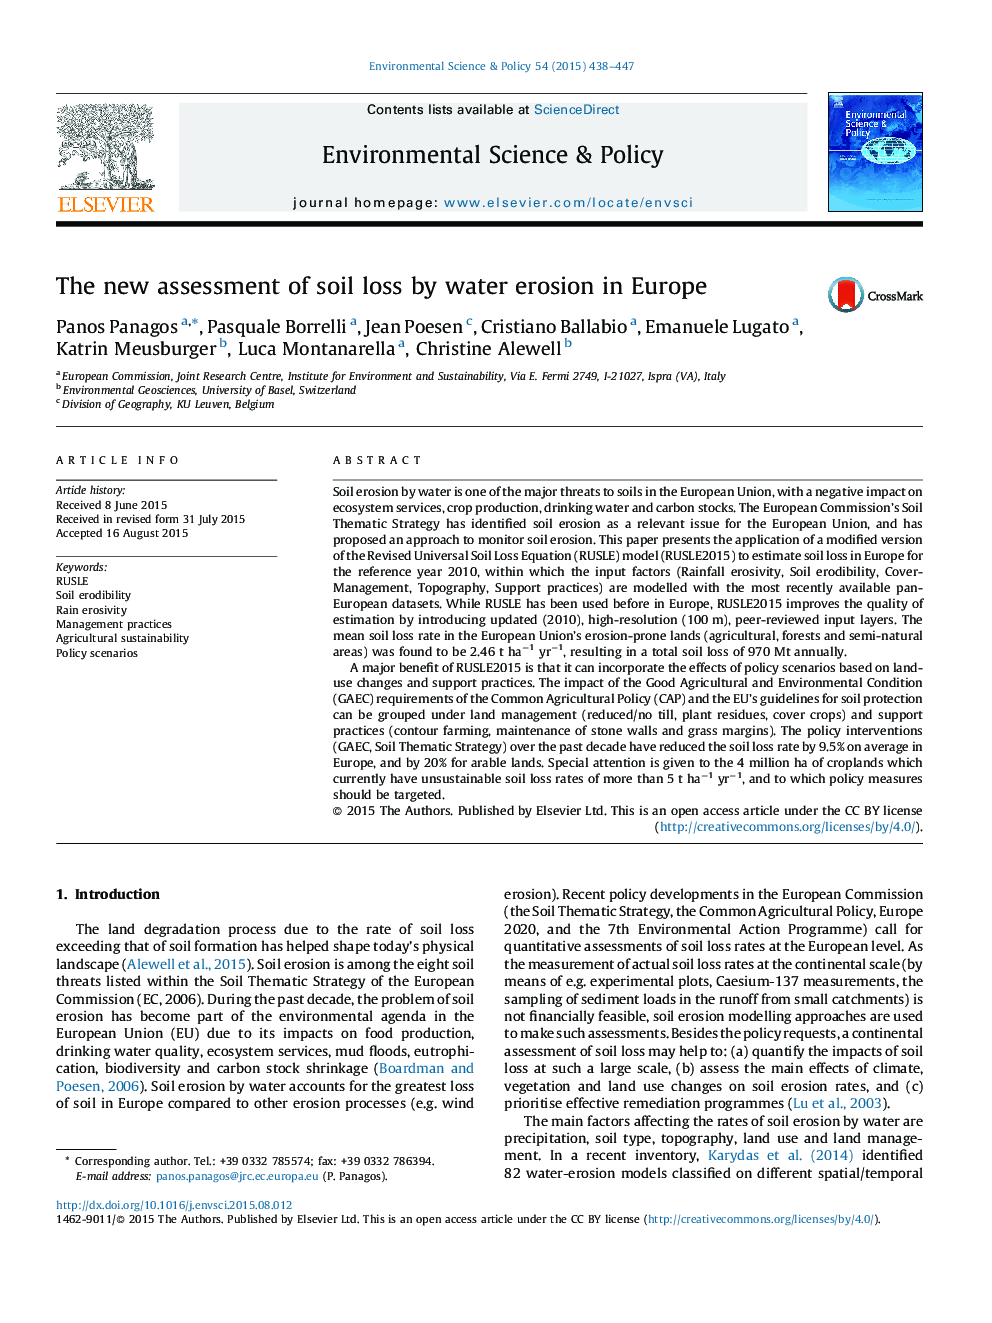 The new assessment of soil loss by water erosion in Europe